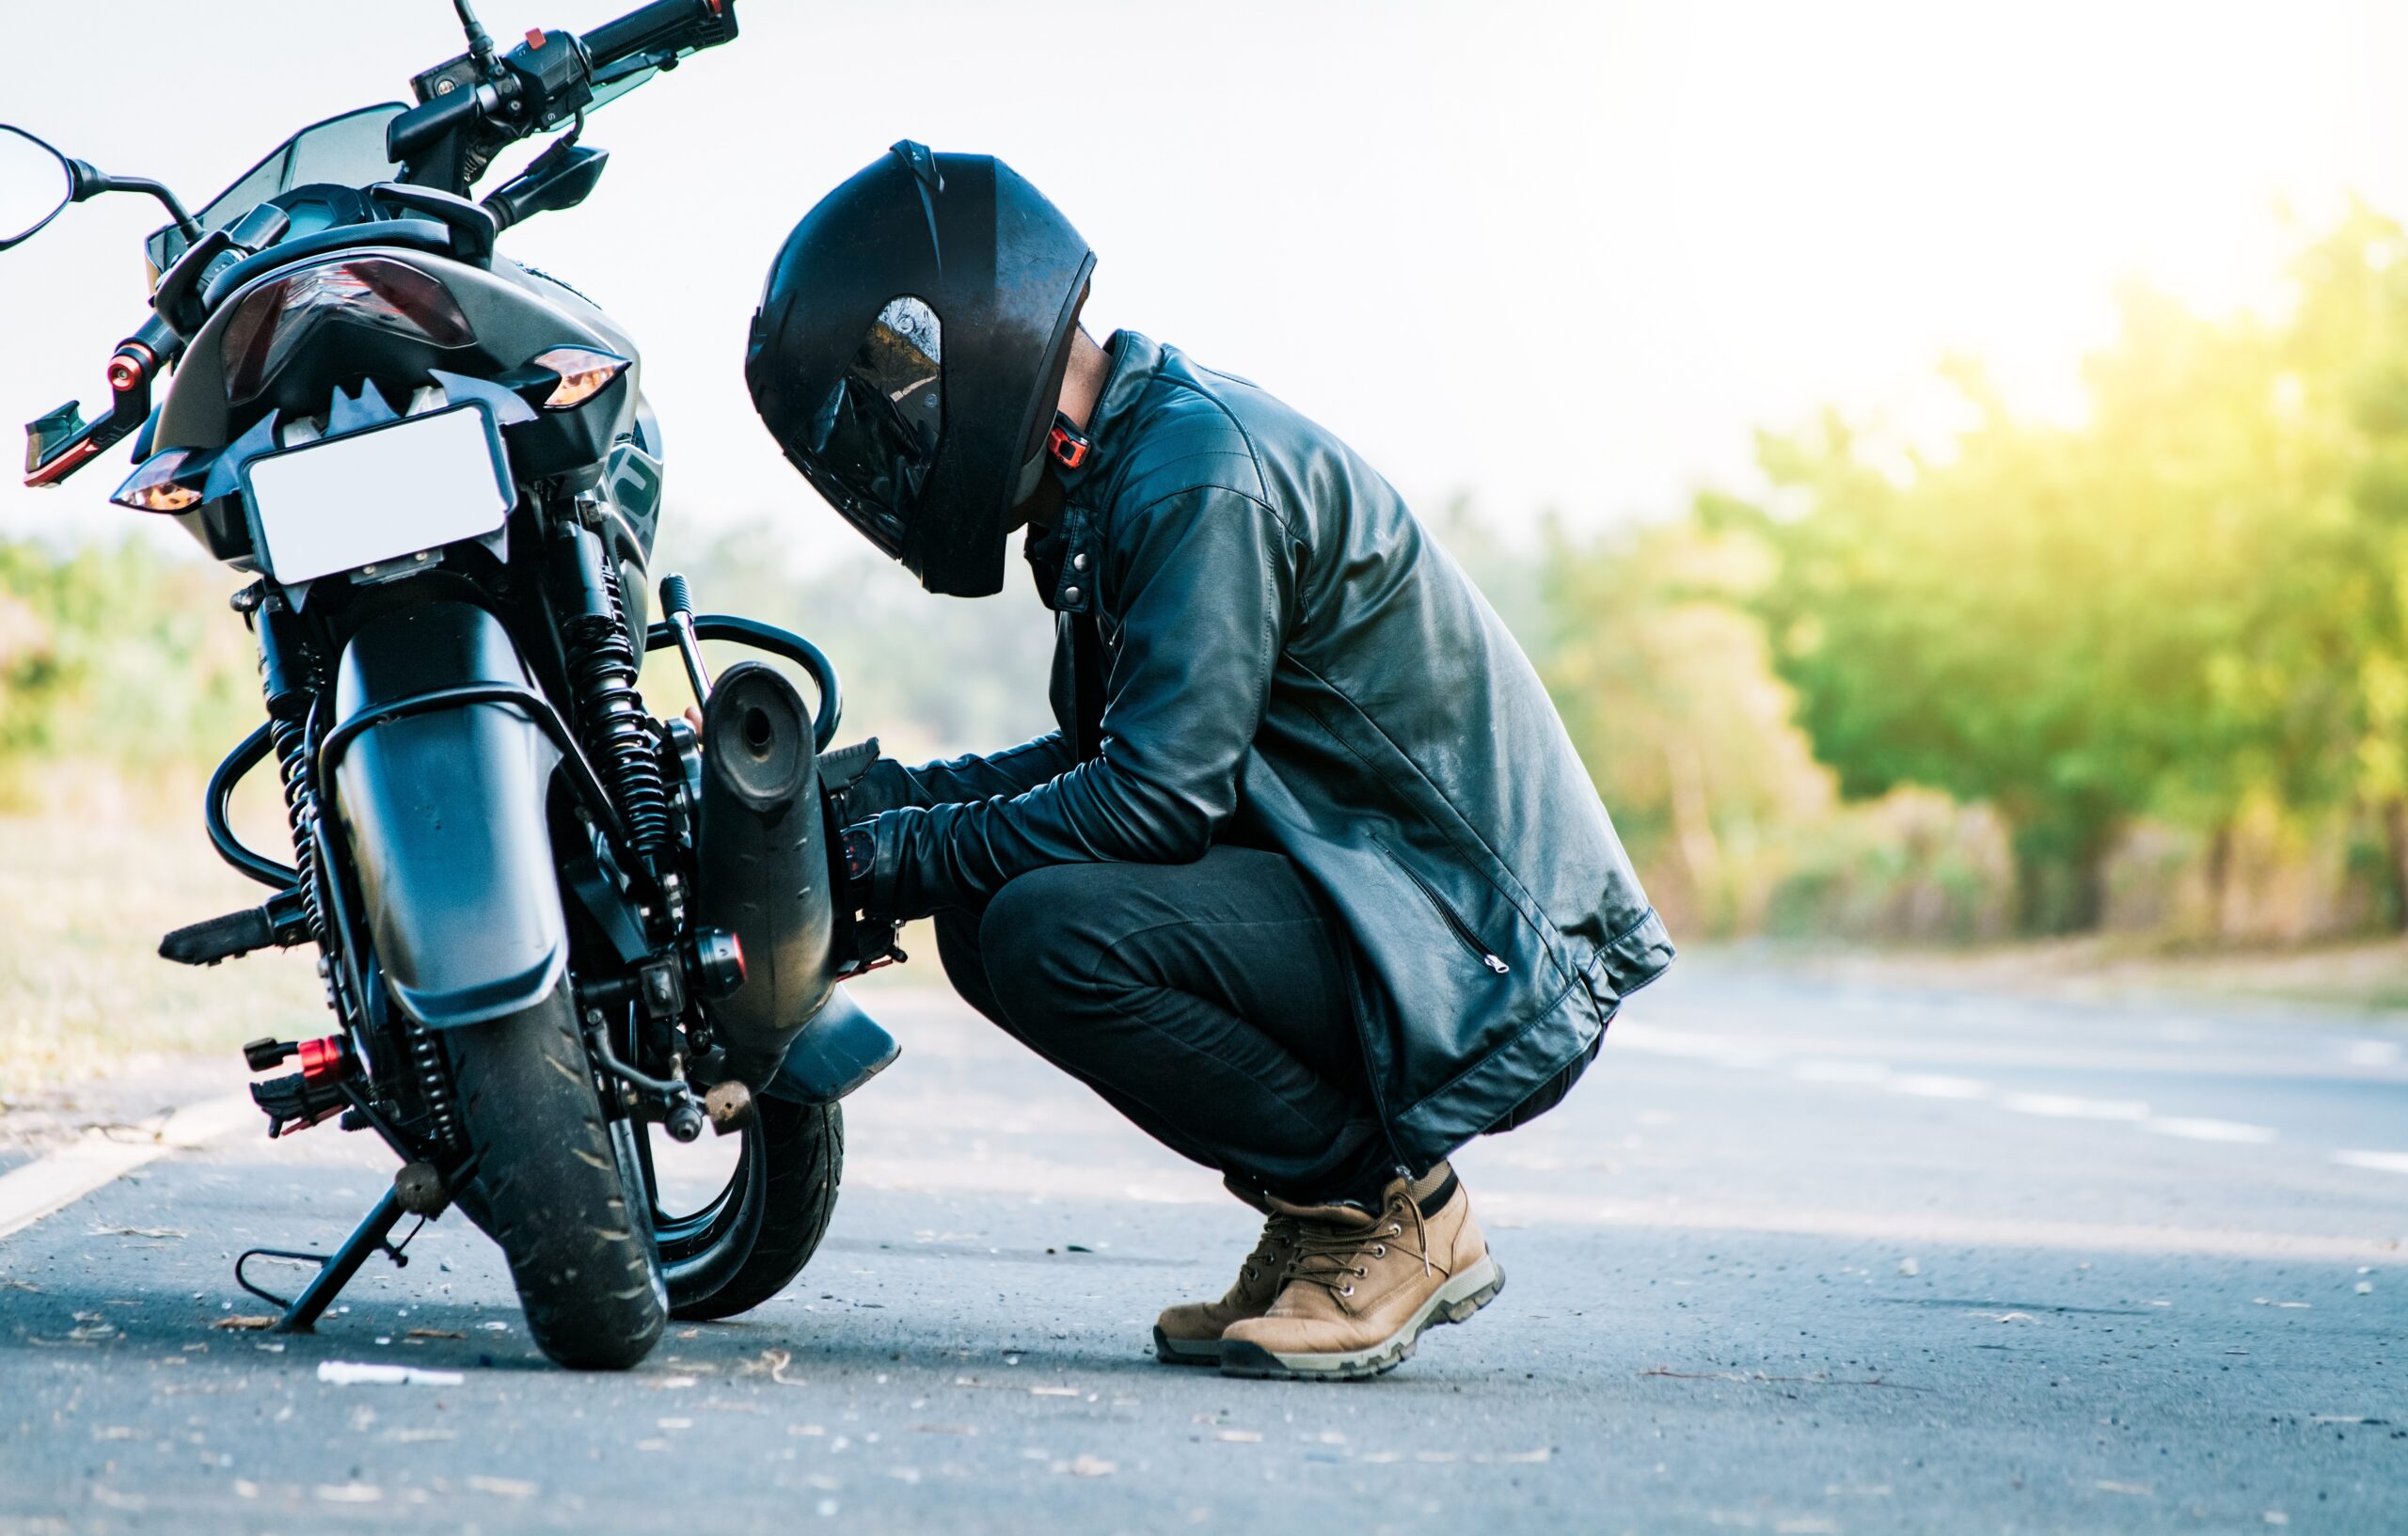 Top 5 Motorcycle Accident Injuries And How To Avoid Them